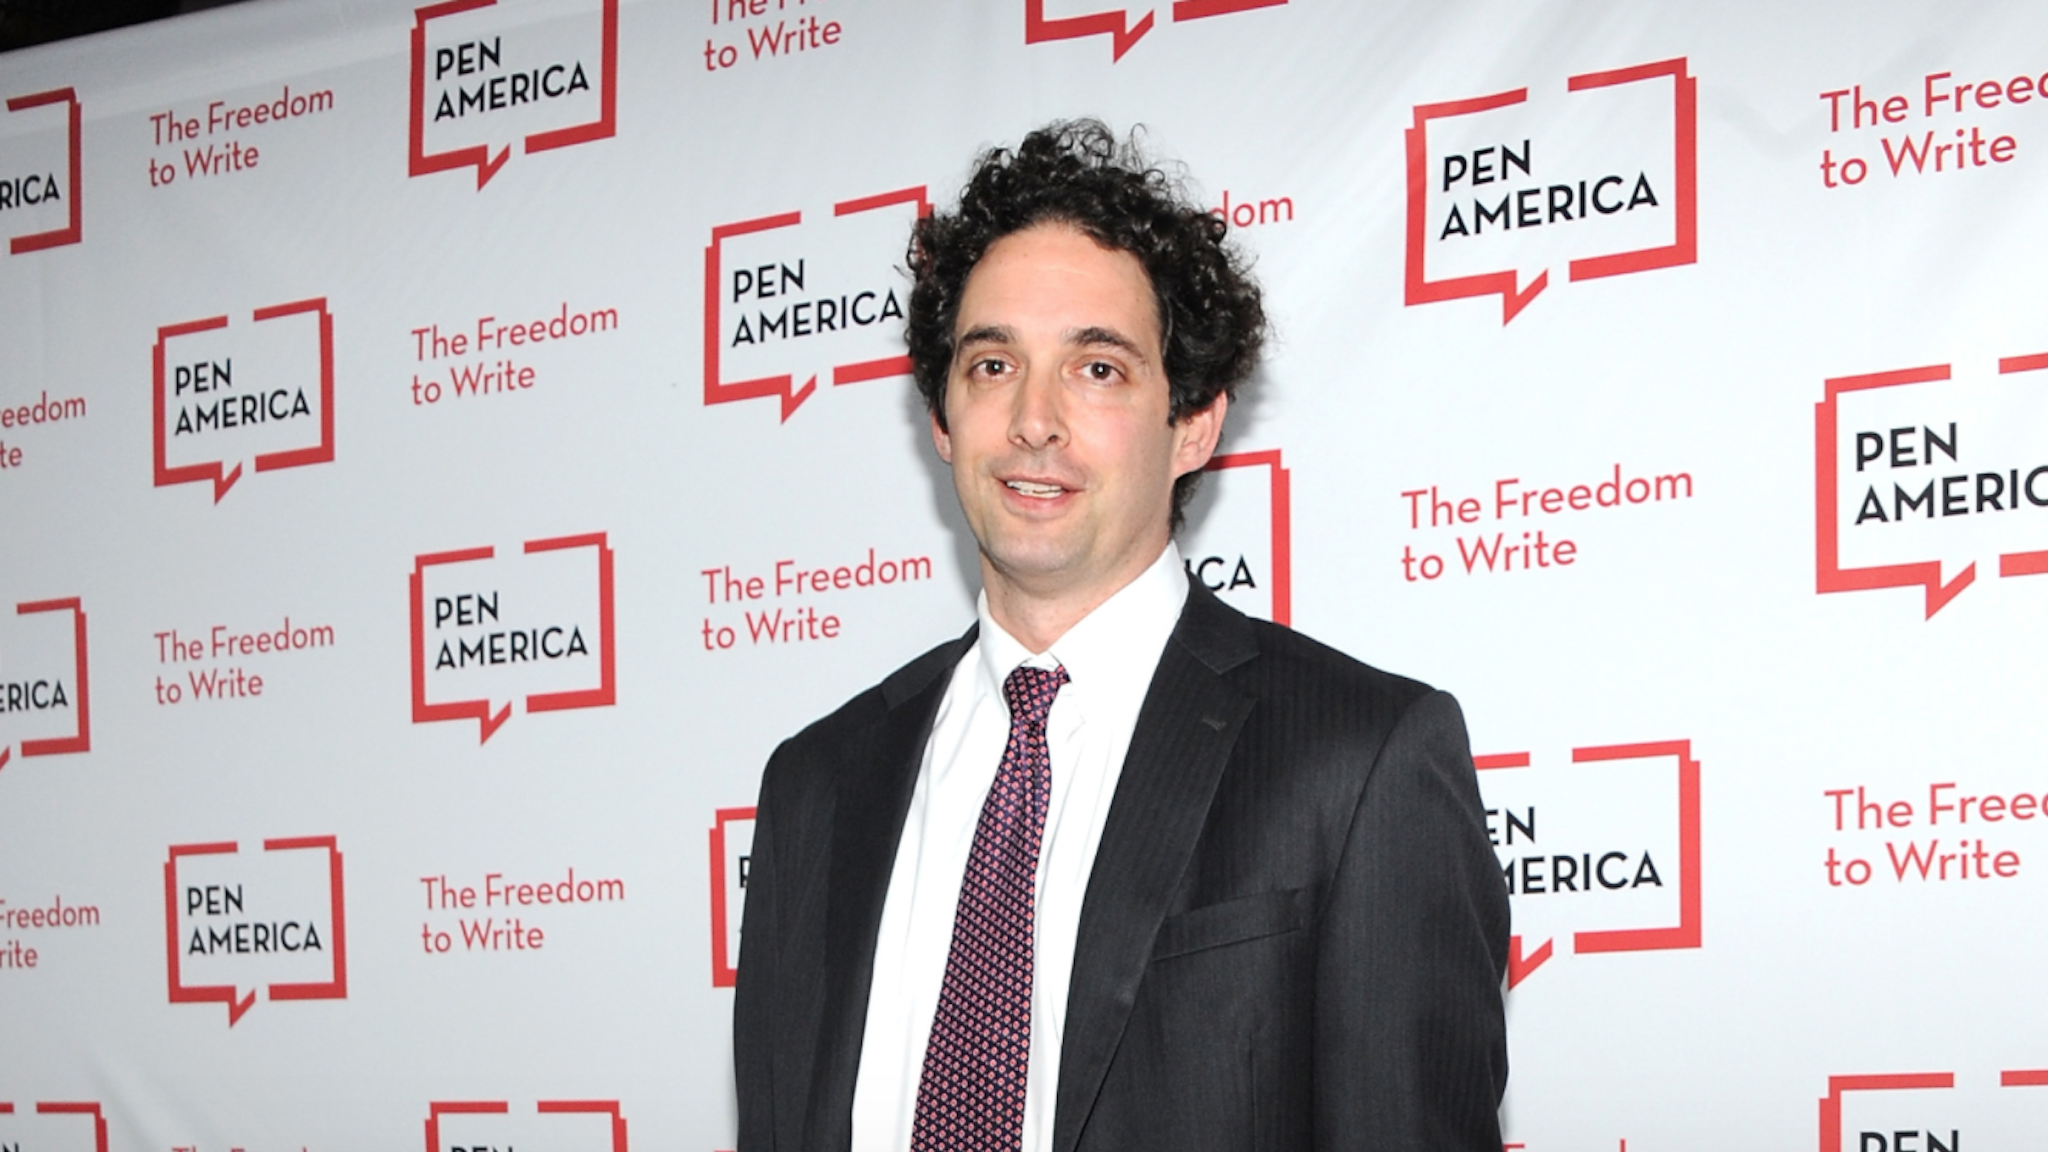 NEW YORK, NY - MAY 16: Alex Berenson attends 2016 PEN America Literary Gala at American Museum of Natural History on May 16, 2016 in New York City.